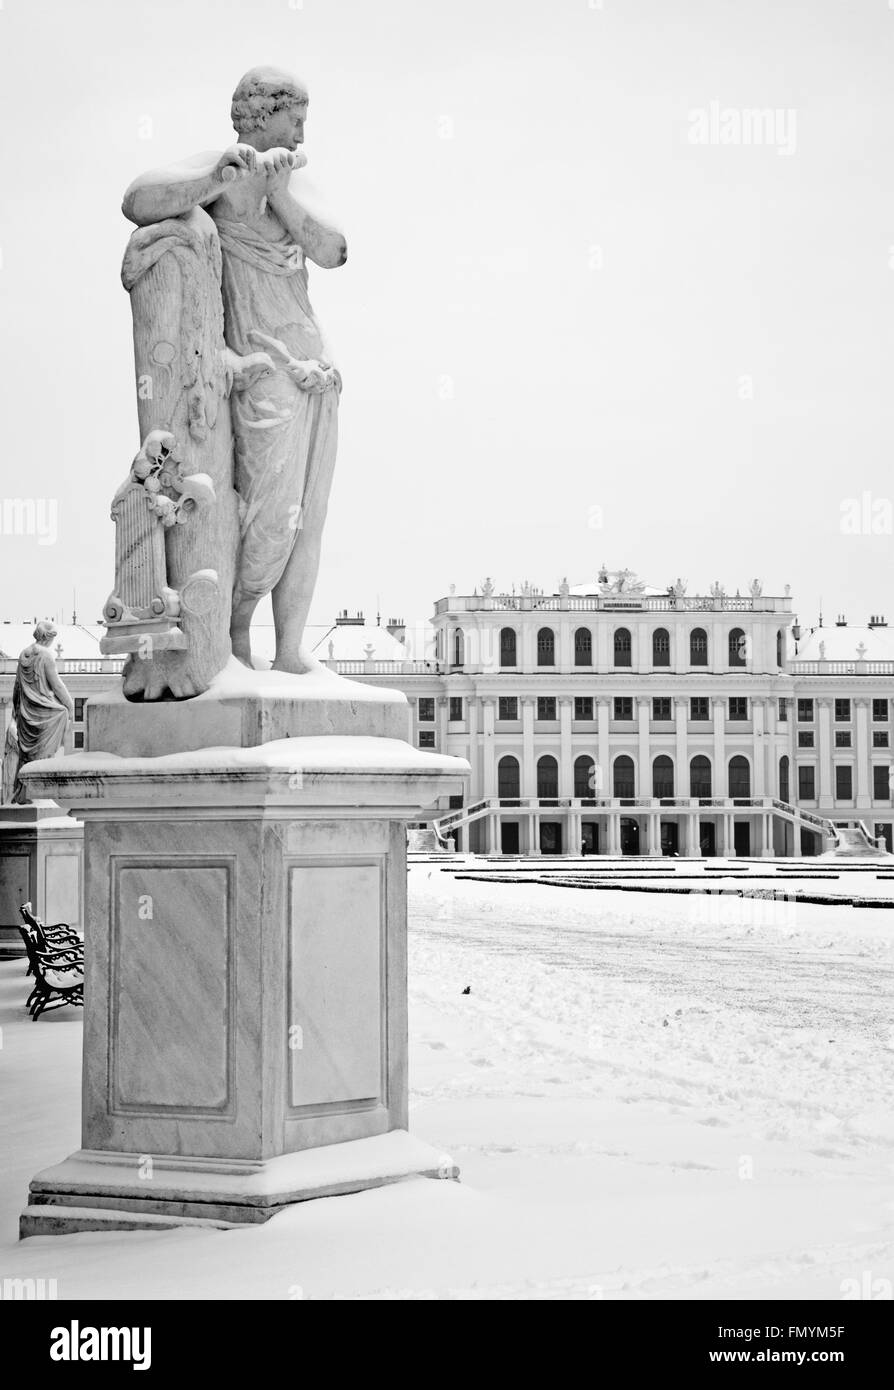 VIENNA,AUSTRIA - JANUARY 15, 2013: Statue of Mercury with the flute by  I. Platzer in gardens of Schonbrunn palace in winter. Stock Photo